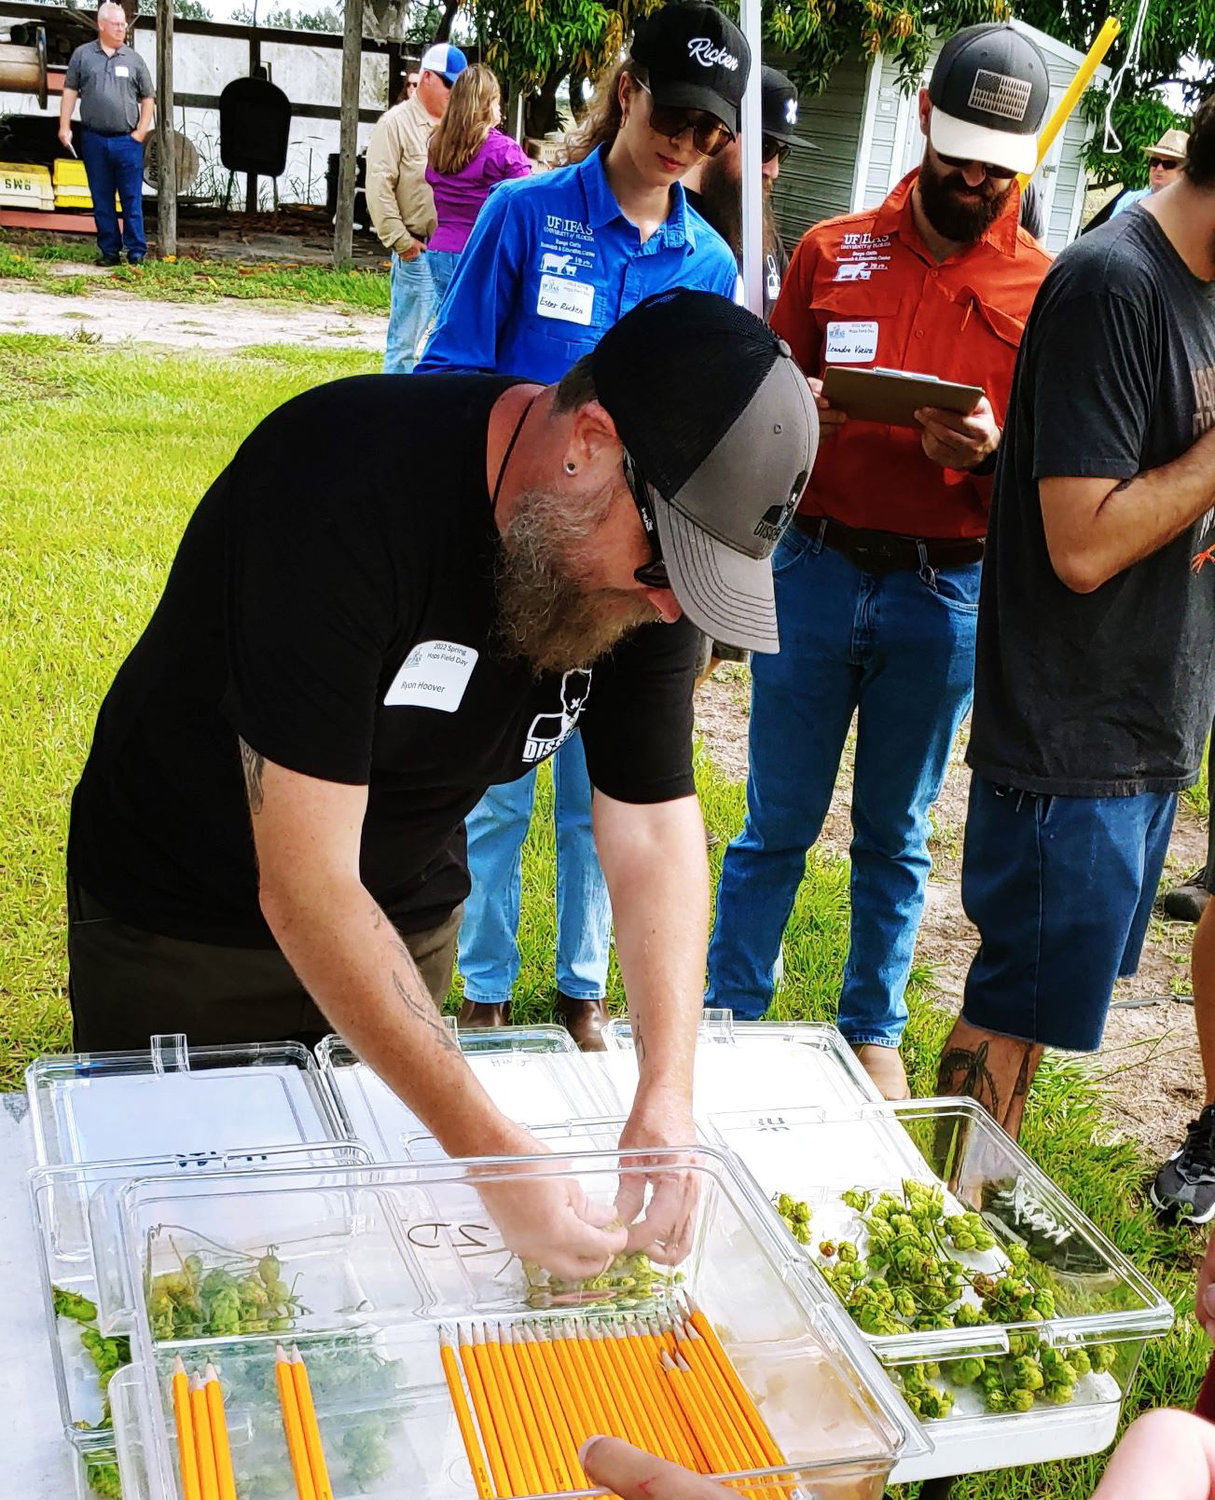 Photo courtesy Brad Buck, UF/IFASA participant at the Hops Field Day takes a cone from a plastic container. Many who attended the field day smelled cones for the aroma of the hops being grown at the center.